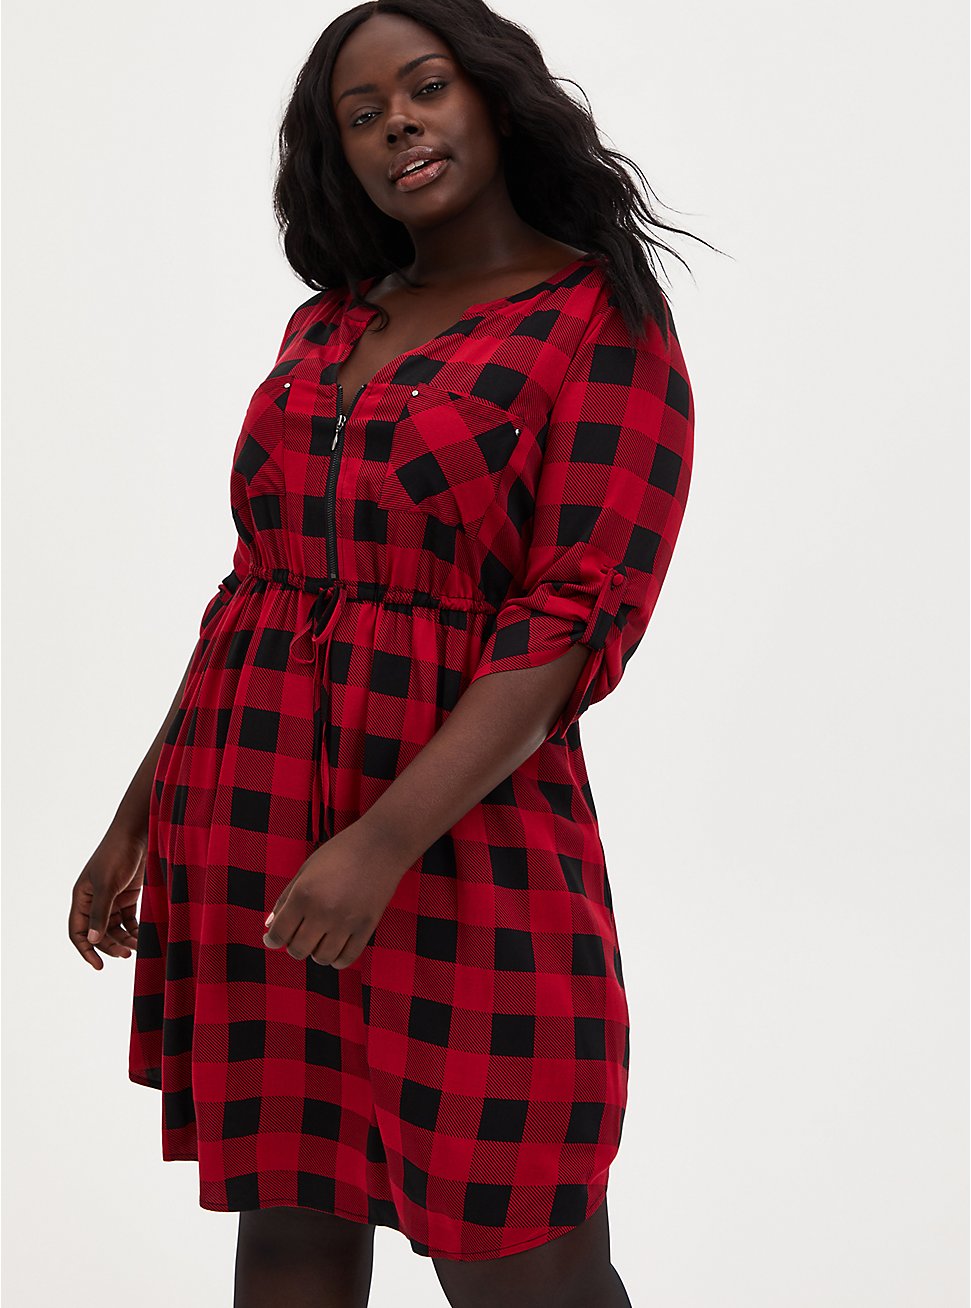 Red Flannel Dress Plus Size